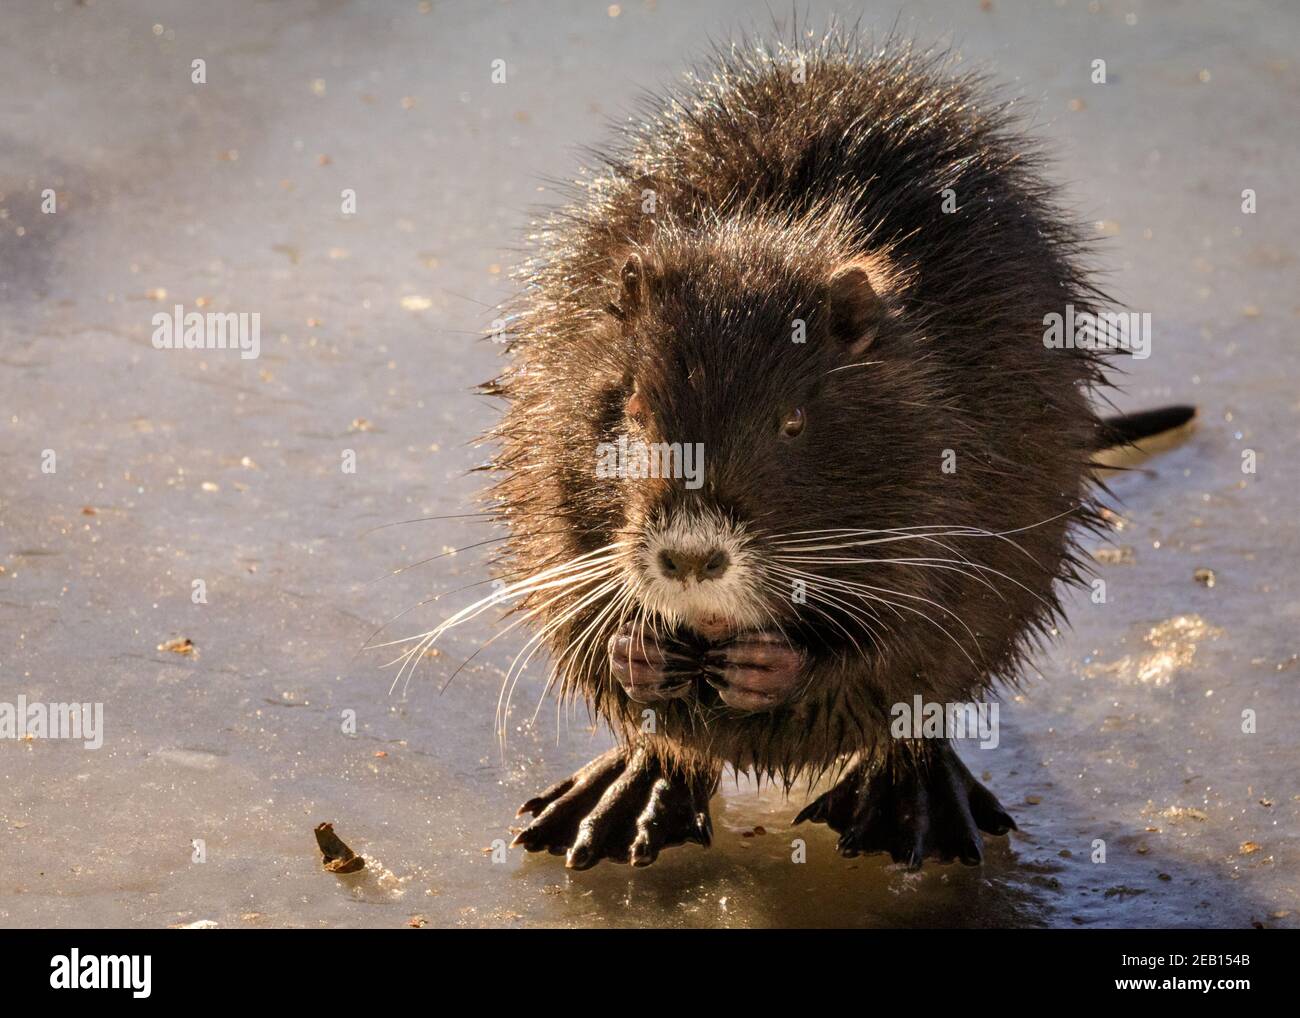 Haltern-am-See, NRW, Germany, 11th Feb 2021. One of the coypu babies is literally on thin ice, carefully wobbling along until it reaches safer ground. The family of coypus (Myocastor coypus), also known as nutria or beaver rats, mum and her now five months old babies, all seem to have survived the recent snow storms well and are clearly enjoying the beautiful sunshine and warmer temperatures today. The animals have first been spotted around Haltern lake last year. Stock Photo